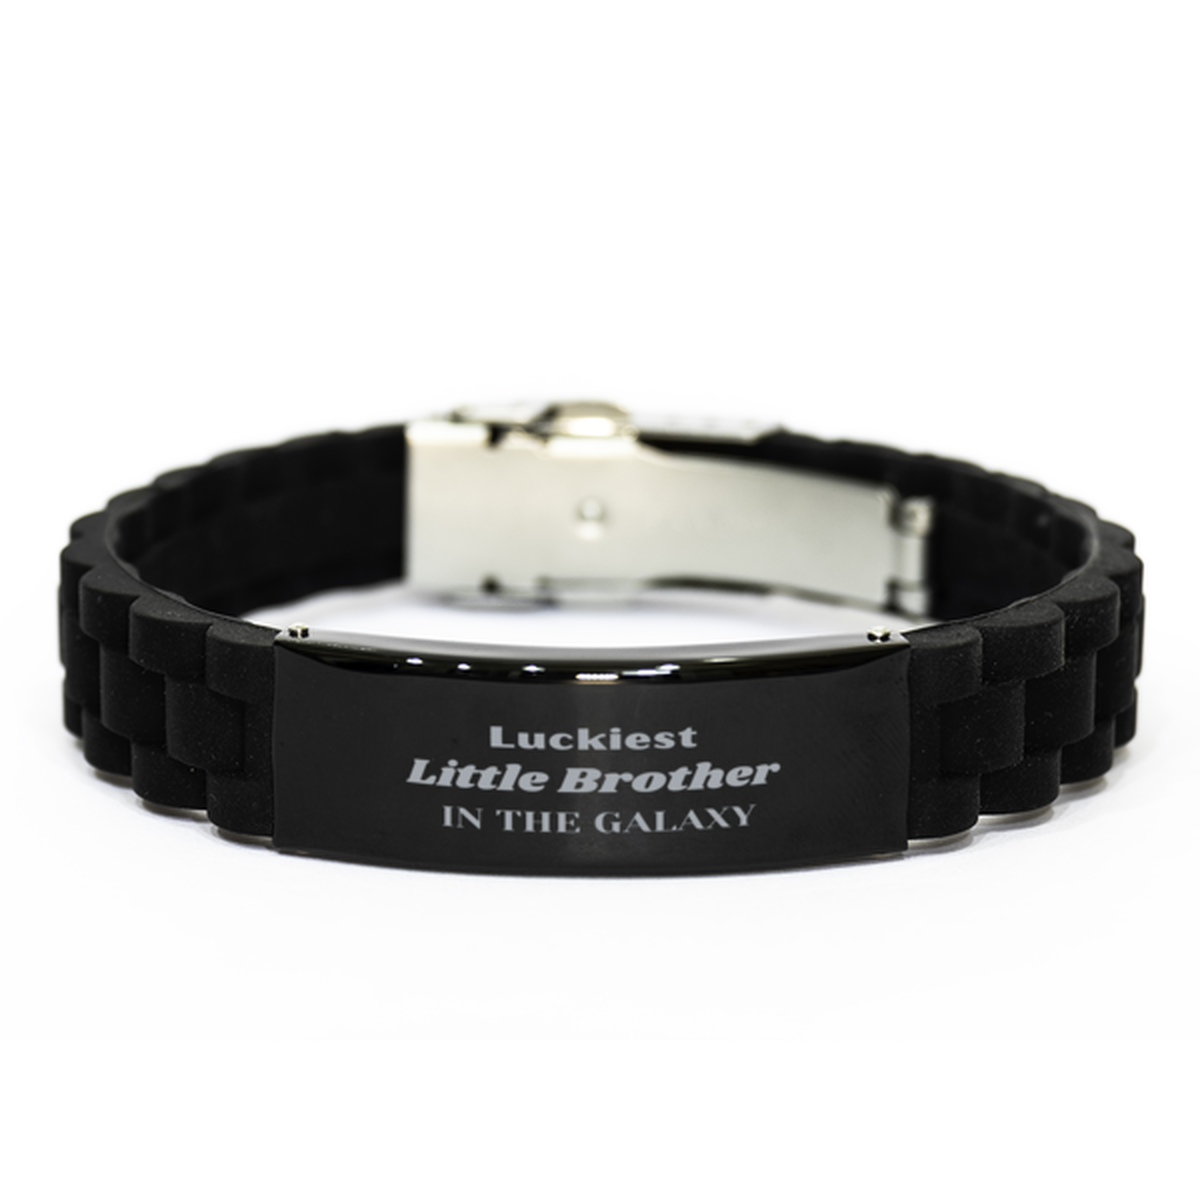 Luckiest Little Brother in the Galaxy, To My Little Brother Engraved Gifts, Christmas Little Brother Black Glidelock Clasp Bracelet Gifts, X-mas Birthday Unique Gifts For Little Brother Men Women